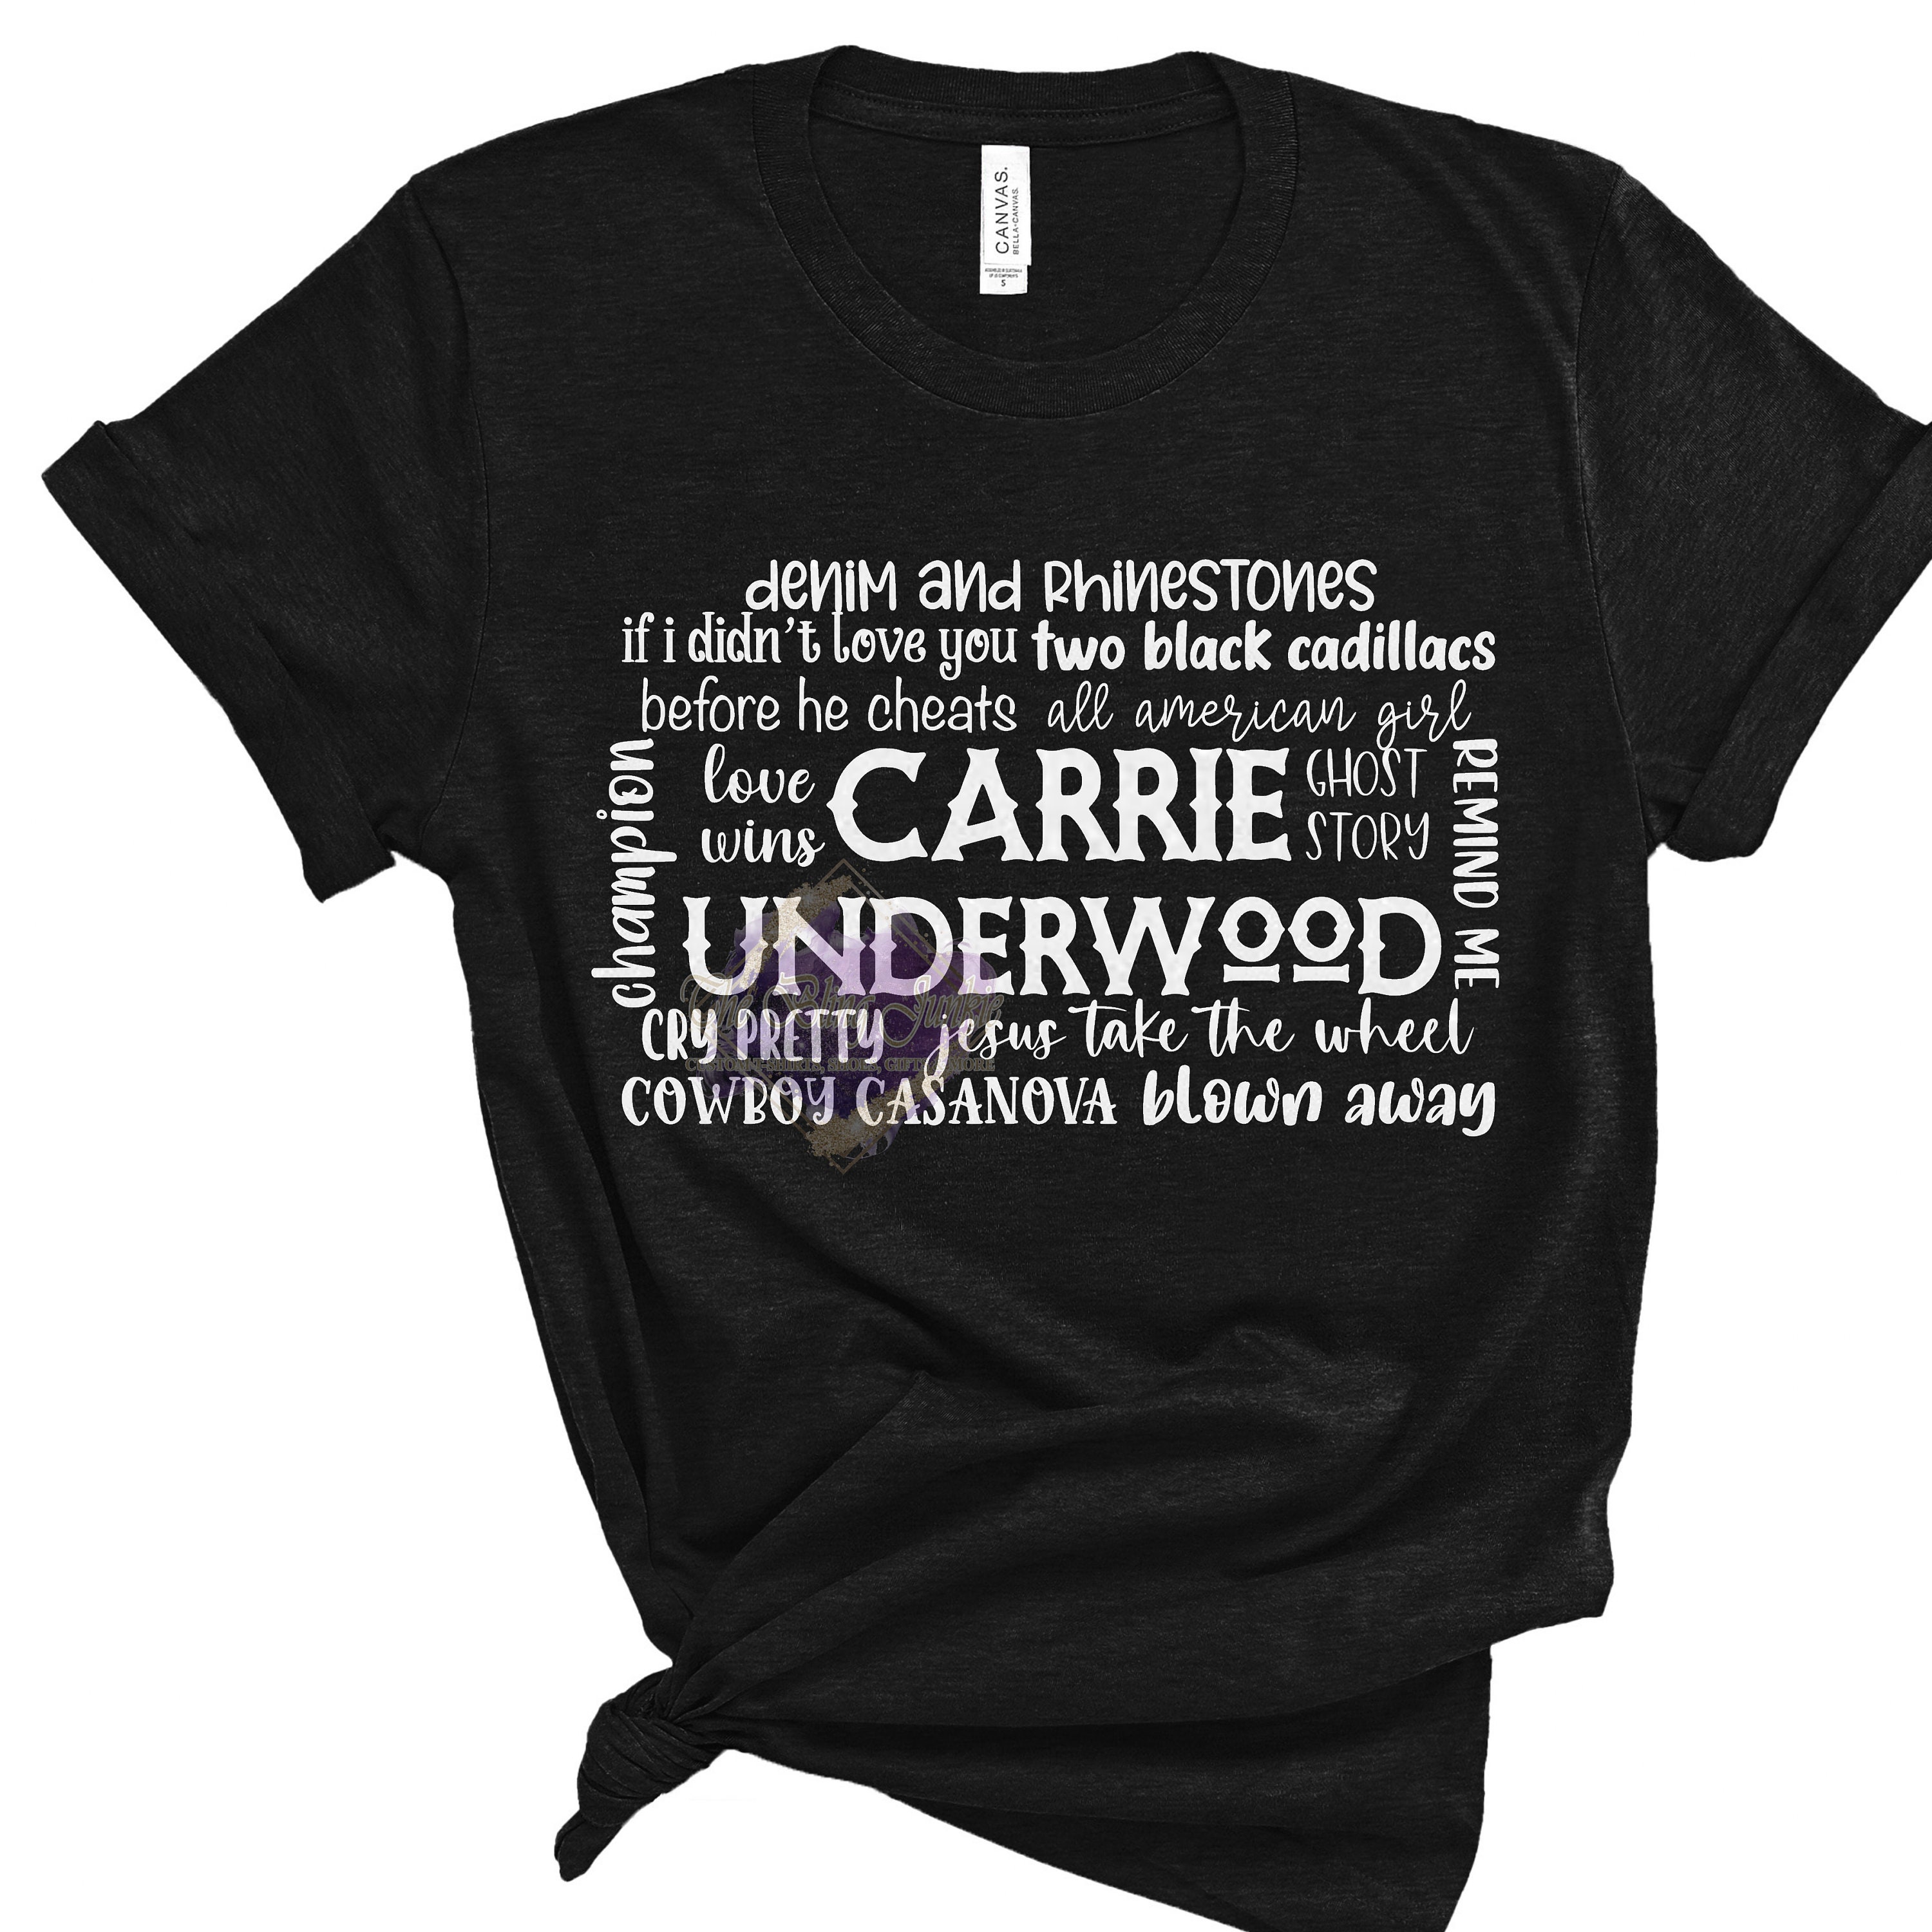 Carrie Underwood Songs Inspired T-shirt, Carrie Underwood T-shirt